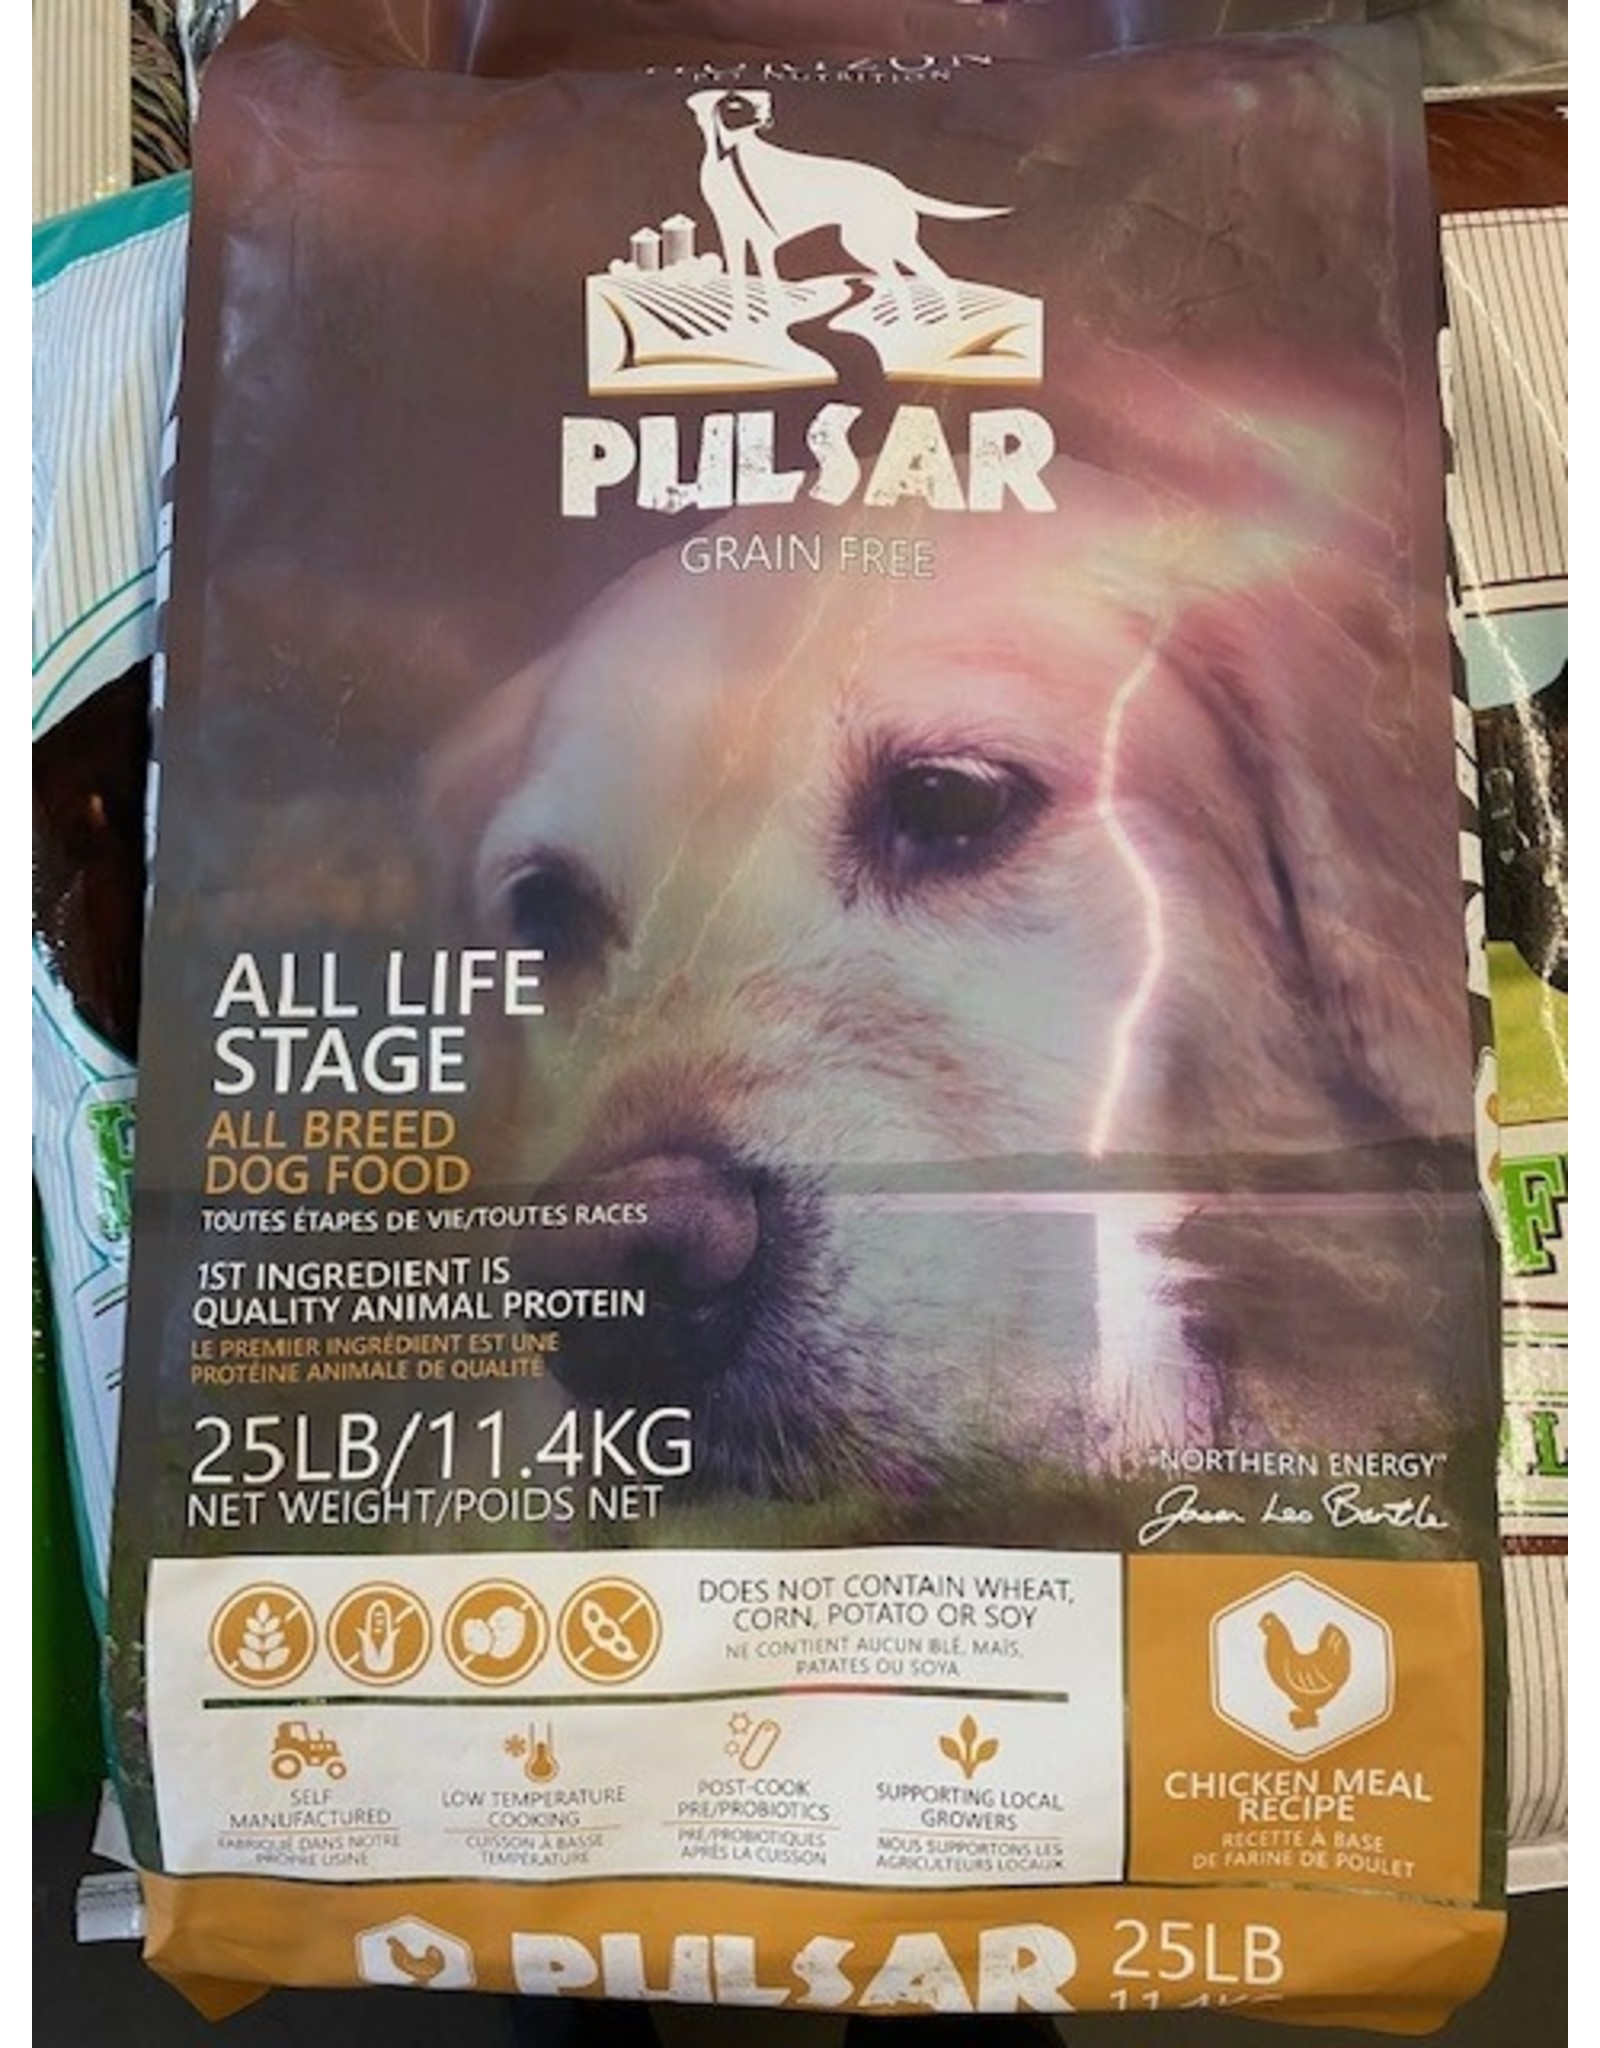 HORIZON PULSAR*Dog Food 40+bpy Grain Free - Chicken -25lb (Yellow Bag) All Life Stages 11.4kg/25lb *AAAA 4900164  (C-CAN)